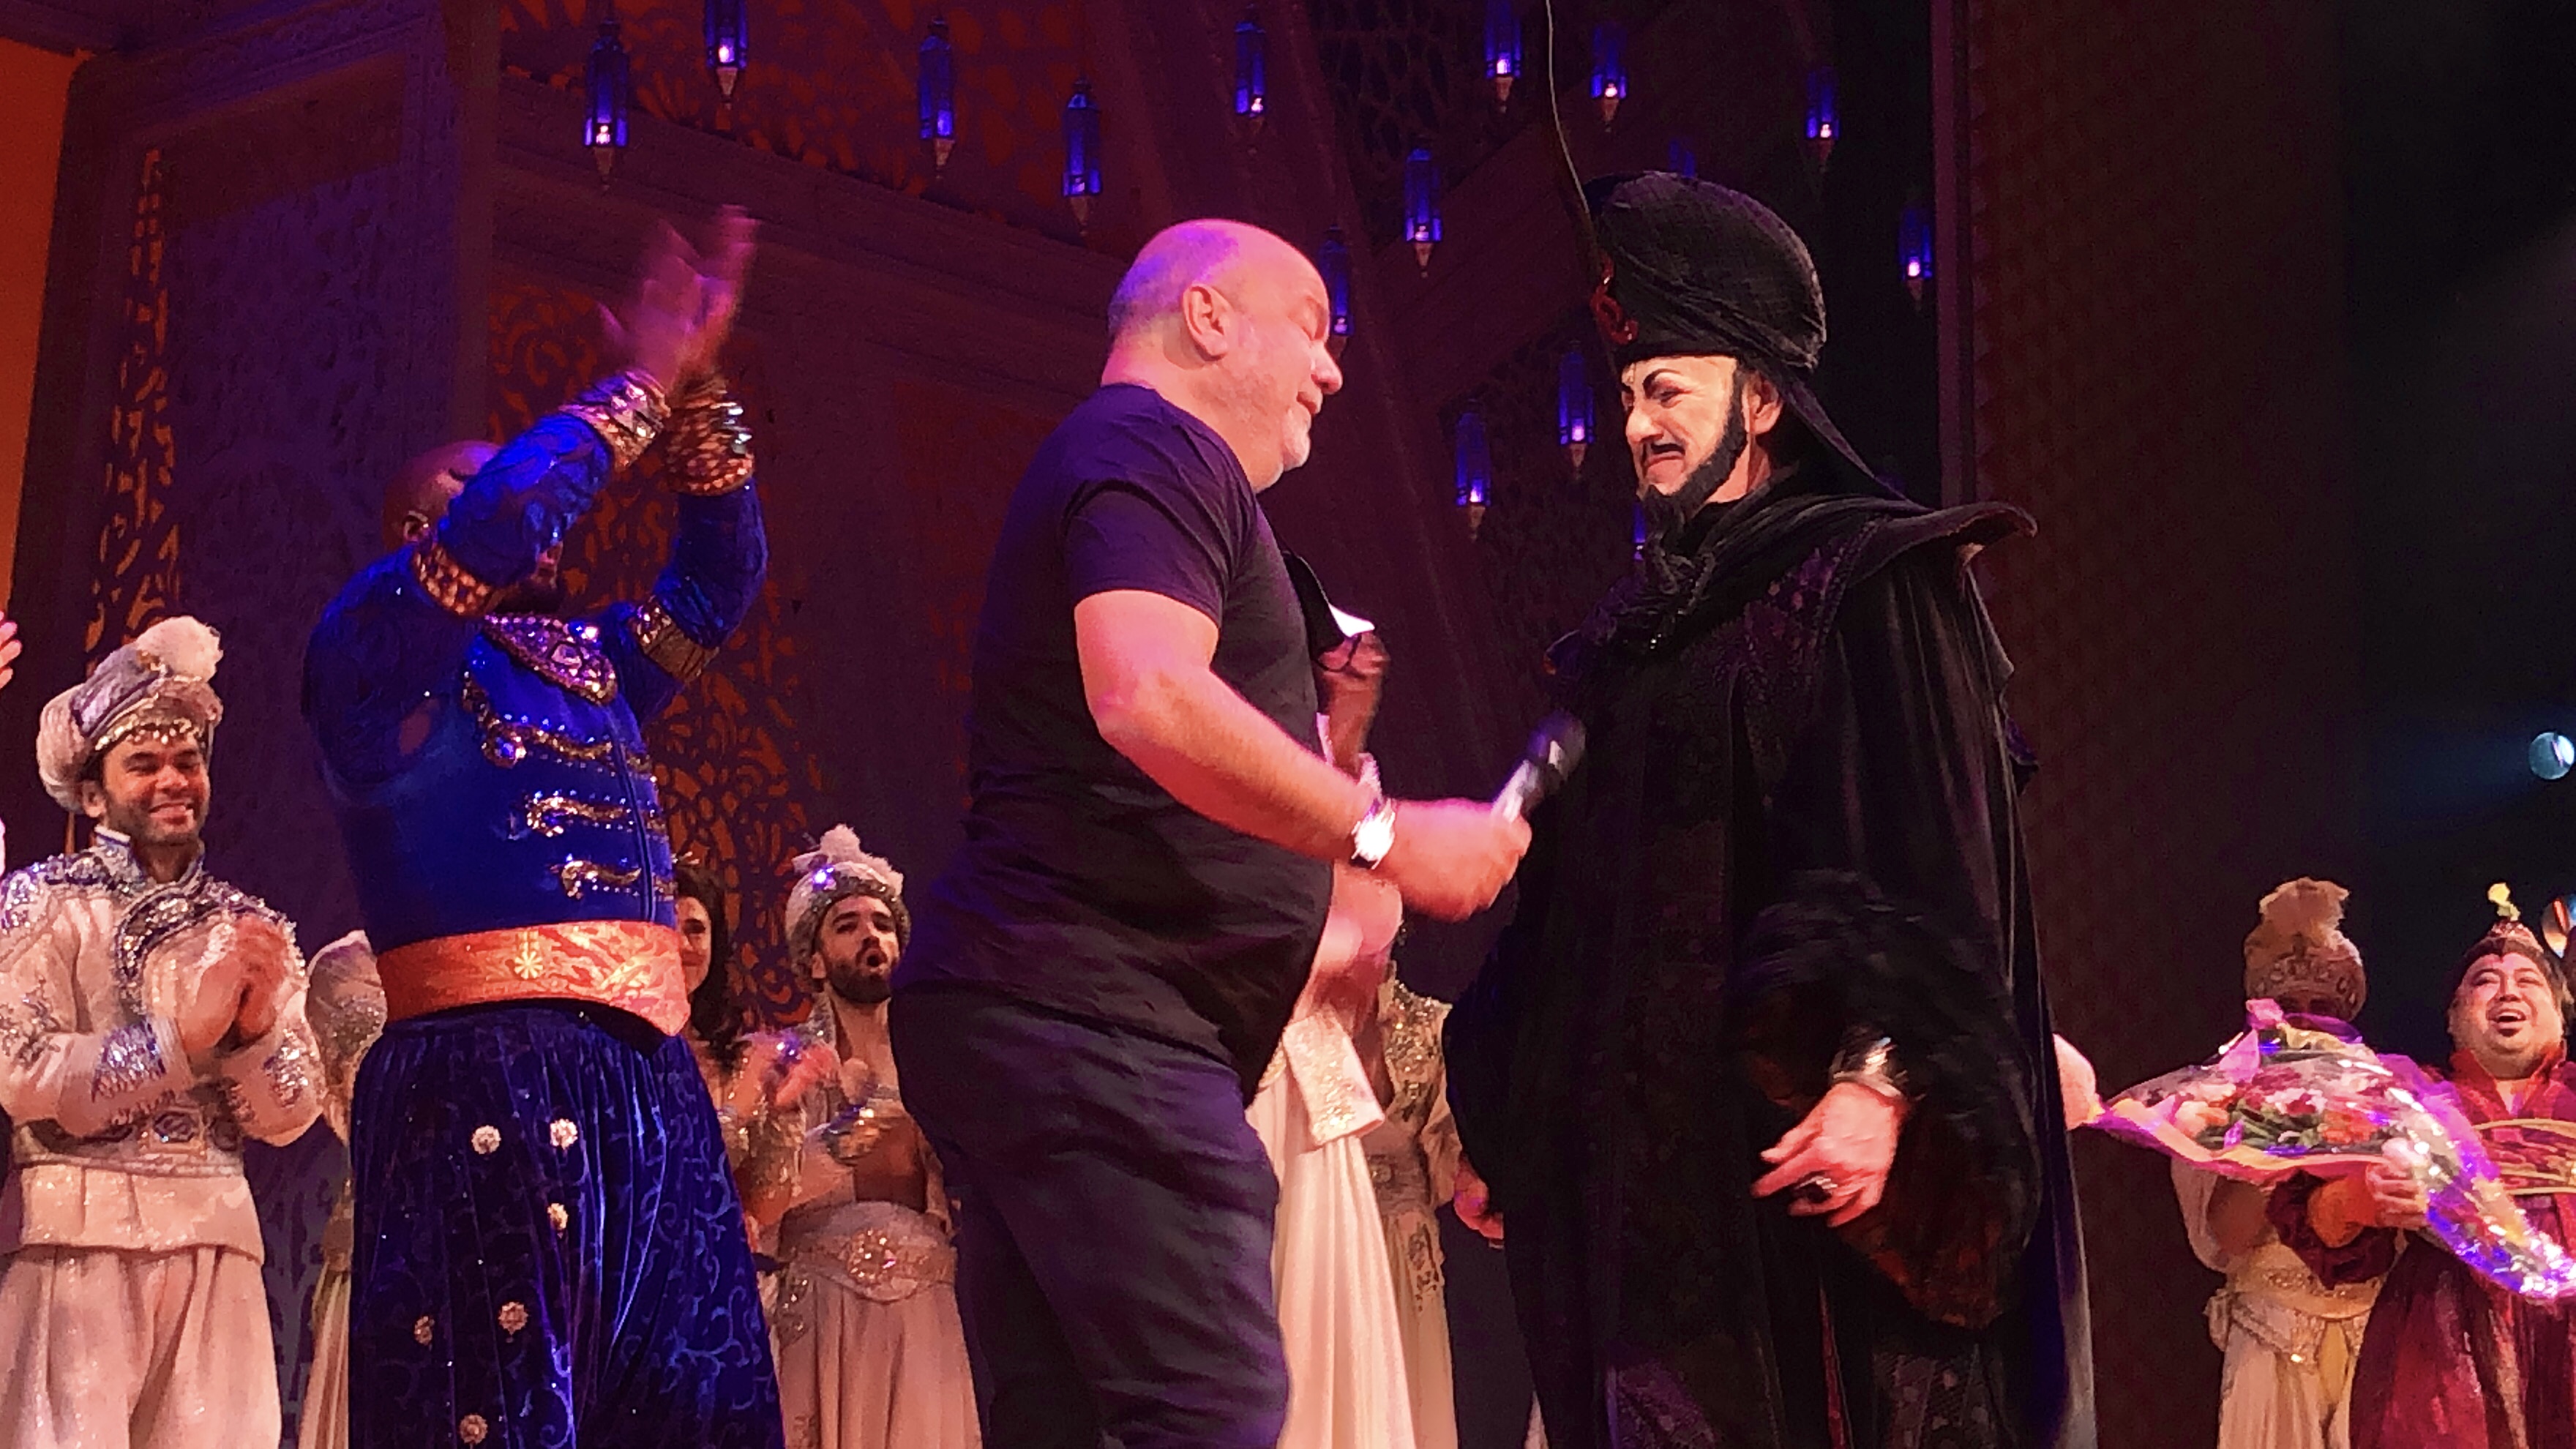 Dennis Stowe Assumes the Role of Jafar in Broadway's Aladdin